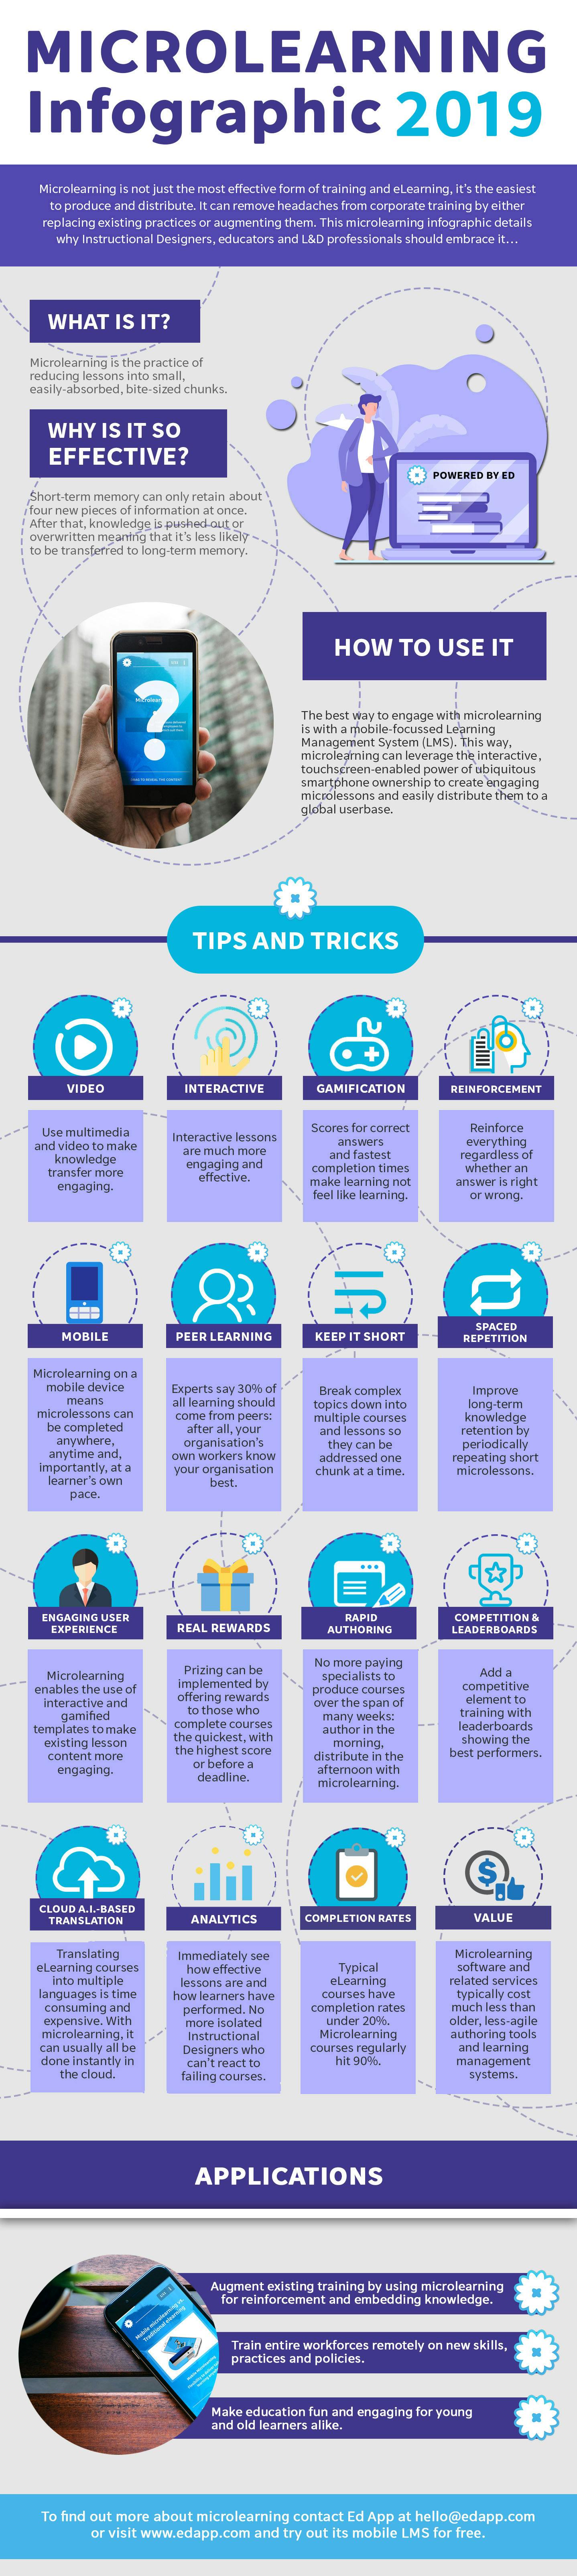 microlearning infographic 2019